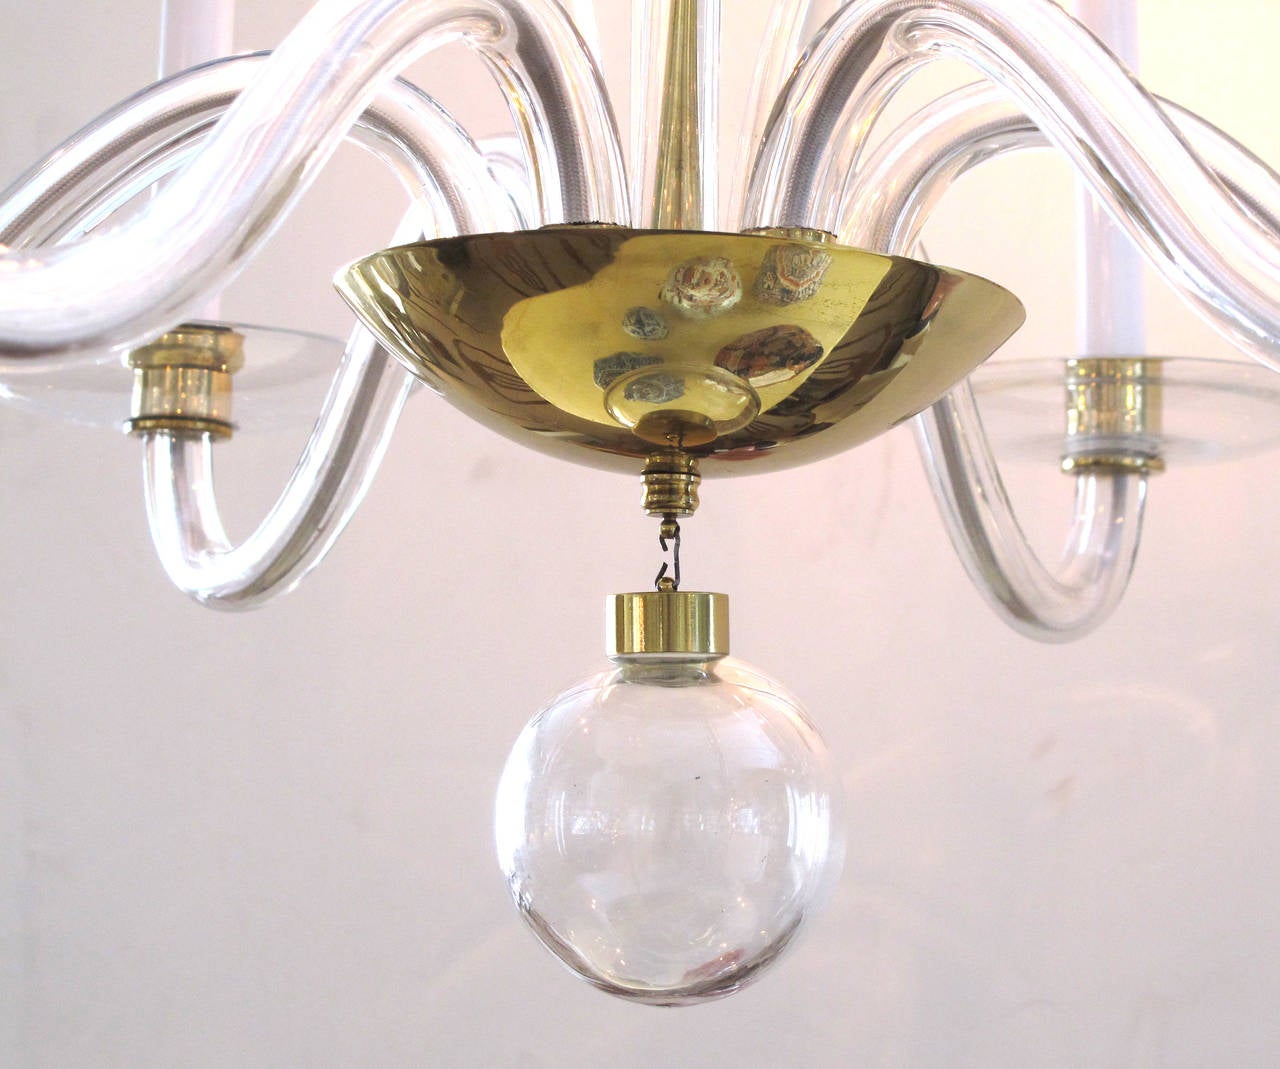 A stylish Murano 1960s clear glass and brass six-light chandelier; the brass bowl emanating upwardly scrolling glass tendrils surrounded by six scrolled arms over a glass spheroid pendant.